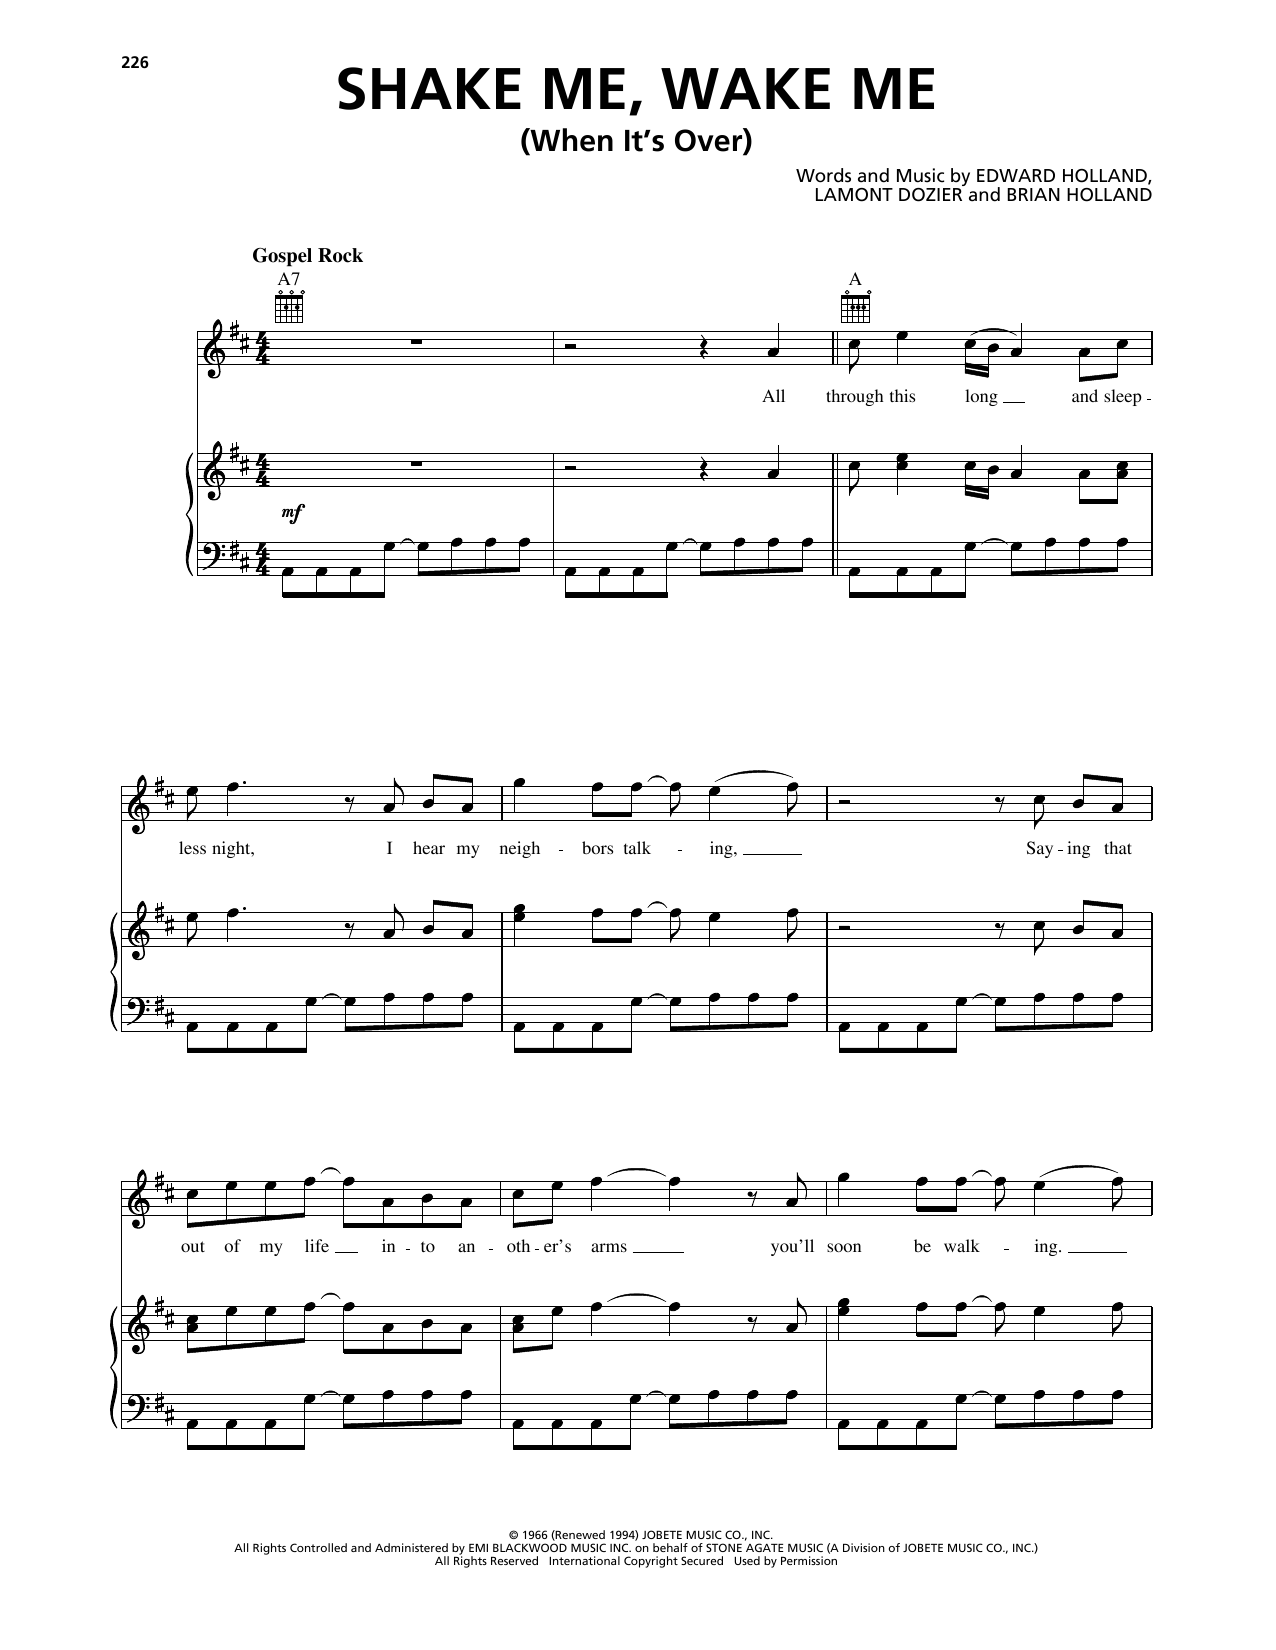 The Four Tops 'Shake Me, Wake Me (When It's Over)' sheet music, chords, lyrics